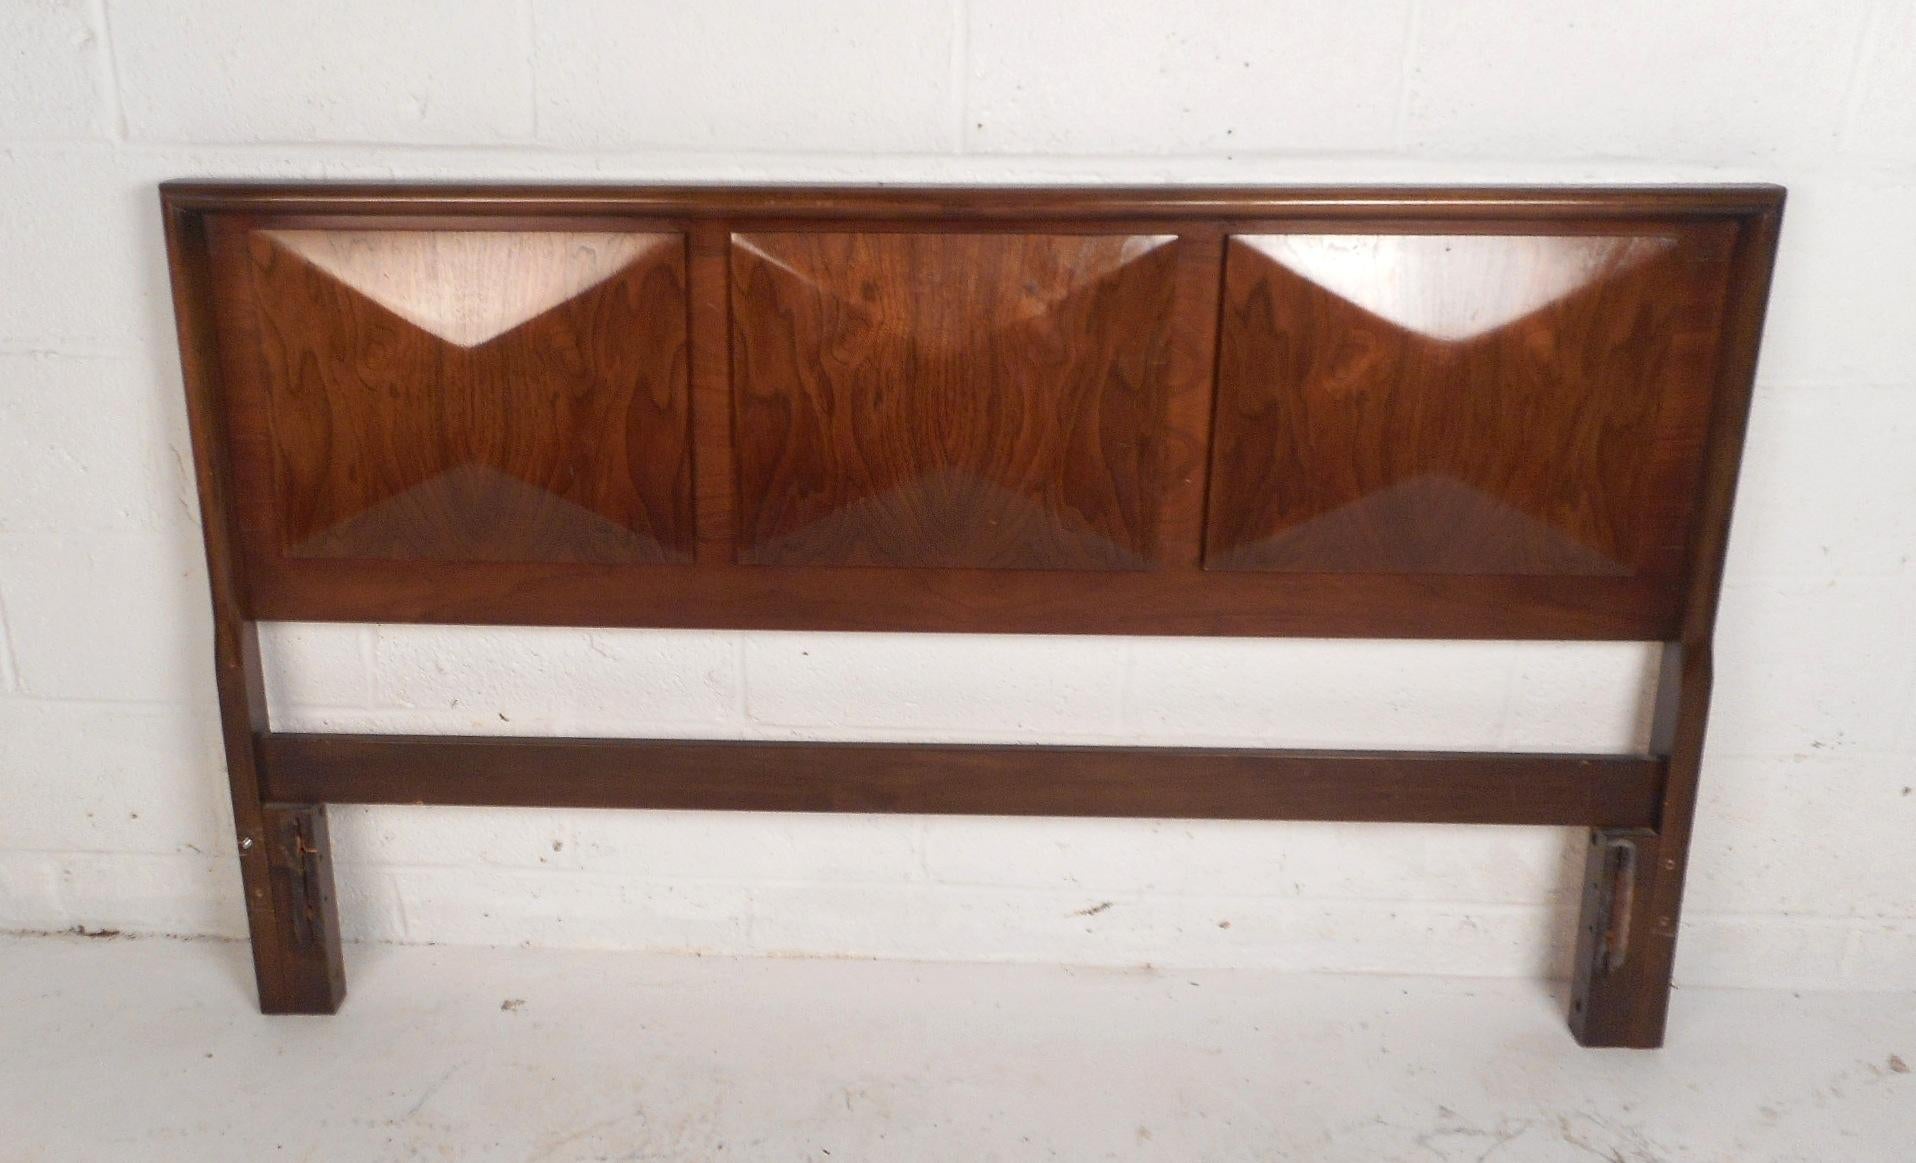 This beautiful vintage modern headboard features a three dimensional diamond front and an elegant vintage walnut finish. A lovely queen-size headboard with tons of character. This unique midcentury piece makes the perfect addition to any modern